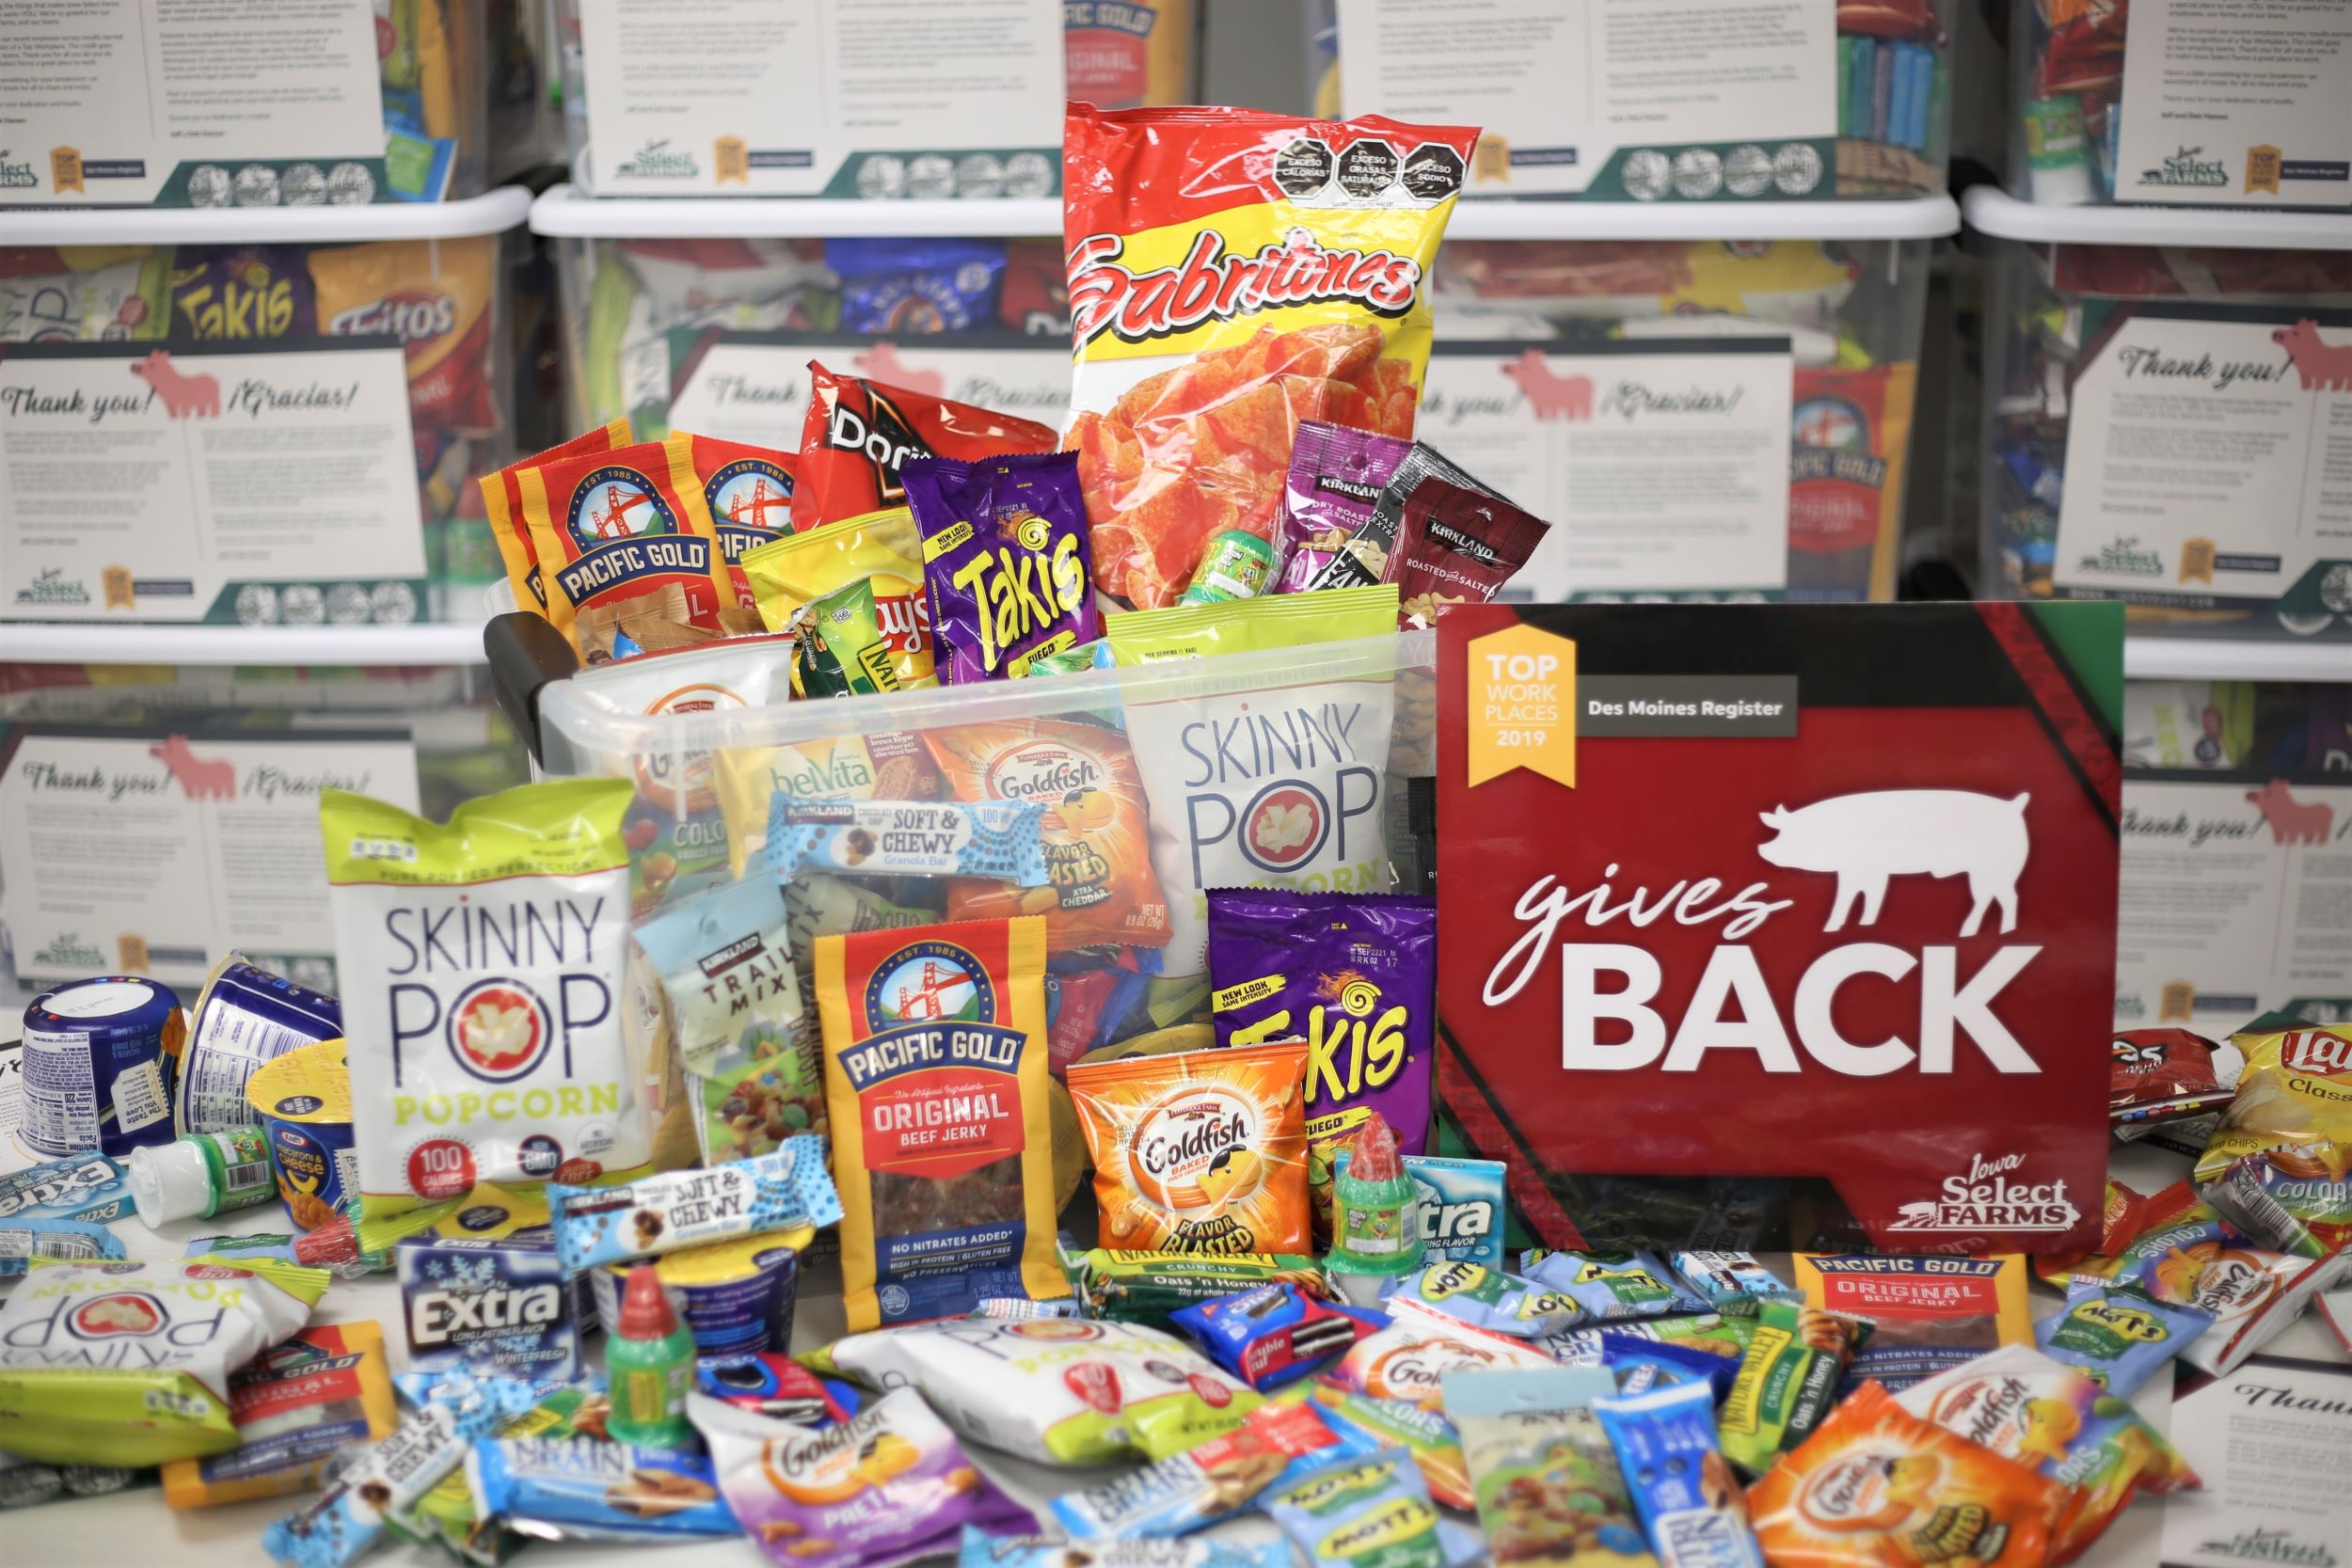 A collection of food and snacks with a red gives back sign.